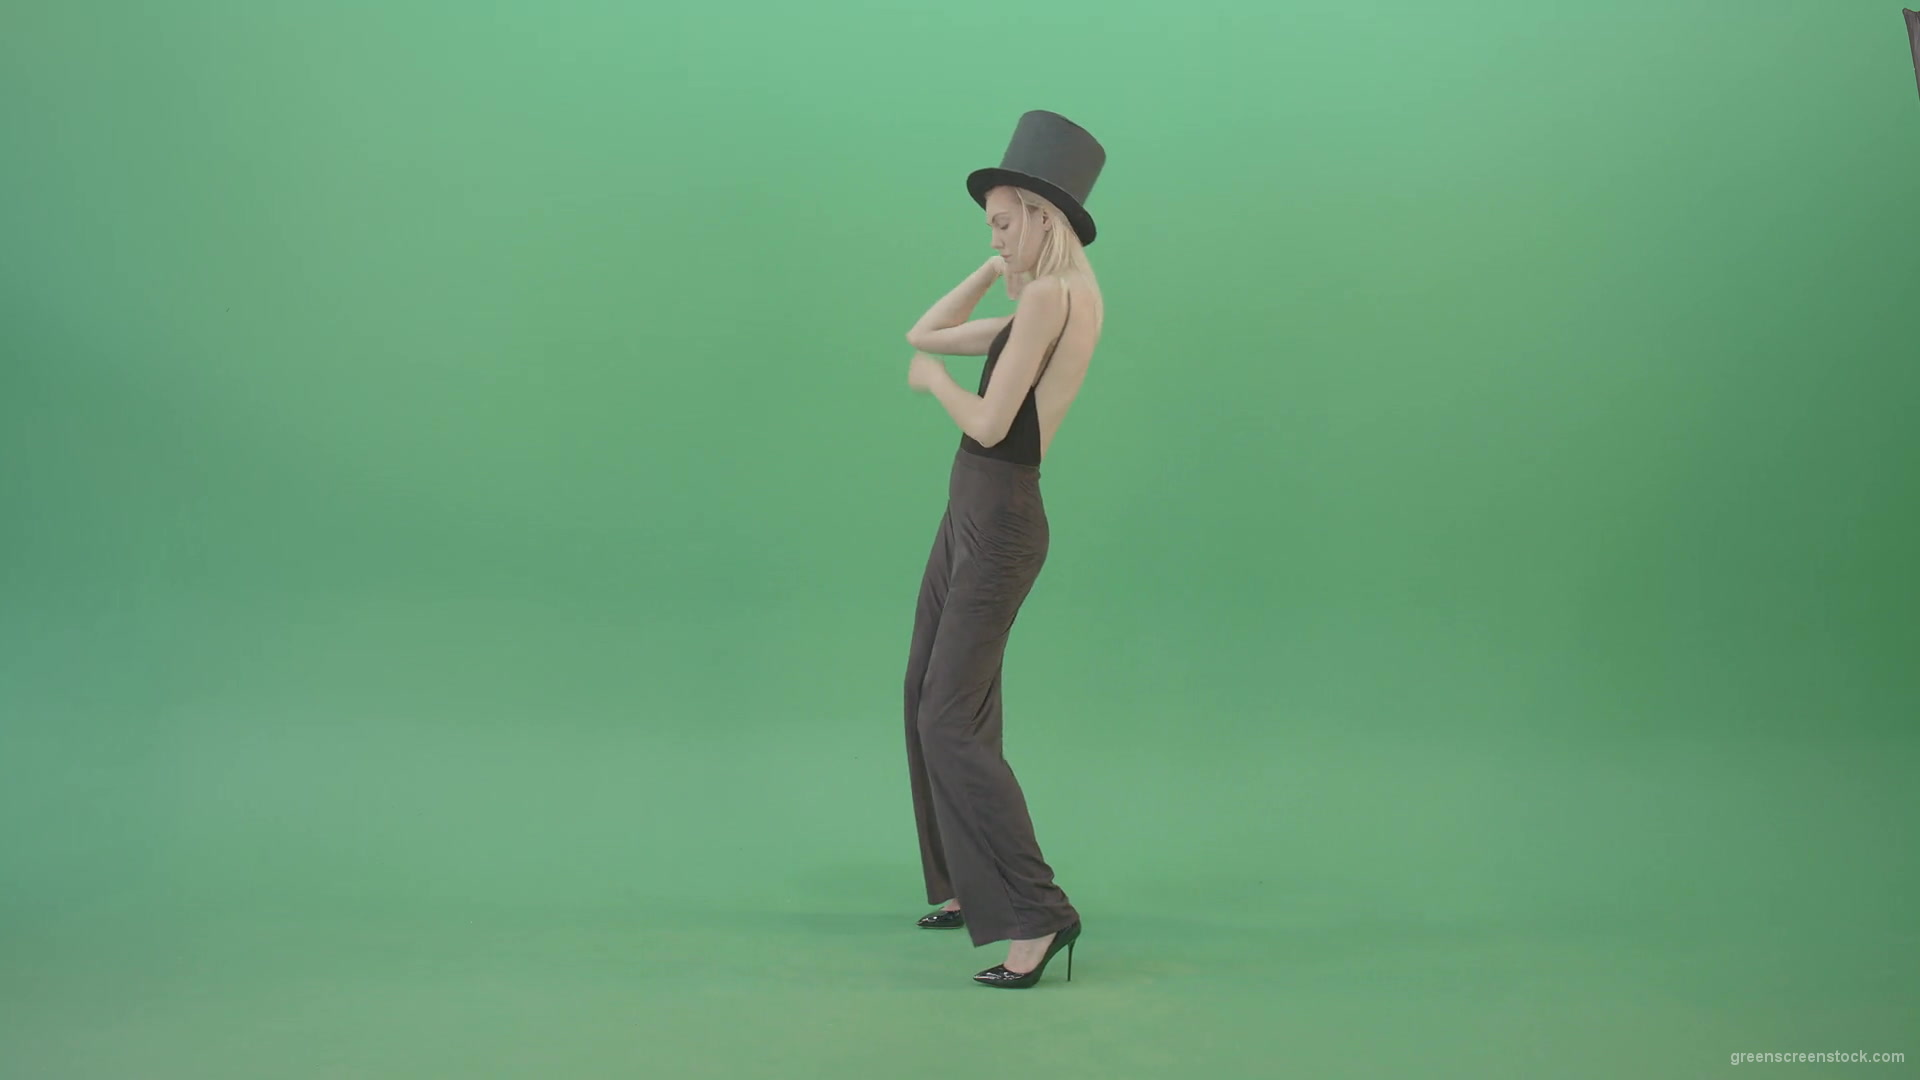 Magic-elegant-dancing-girl-slowly-moving-on-green-background-4K-Video-Footage-1920_005 Green Screen Stock